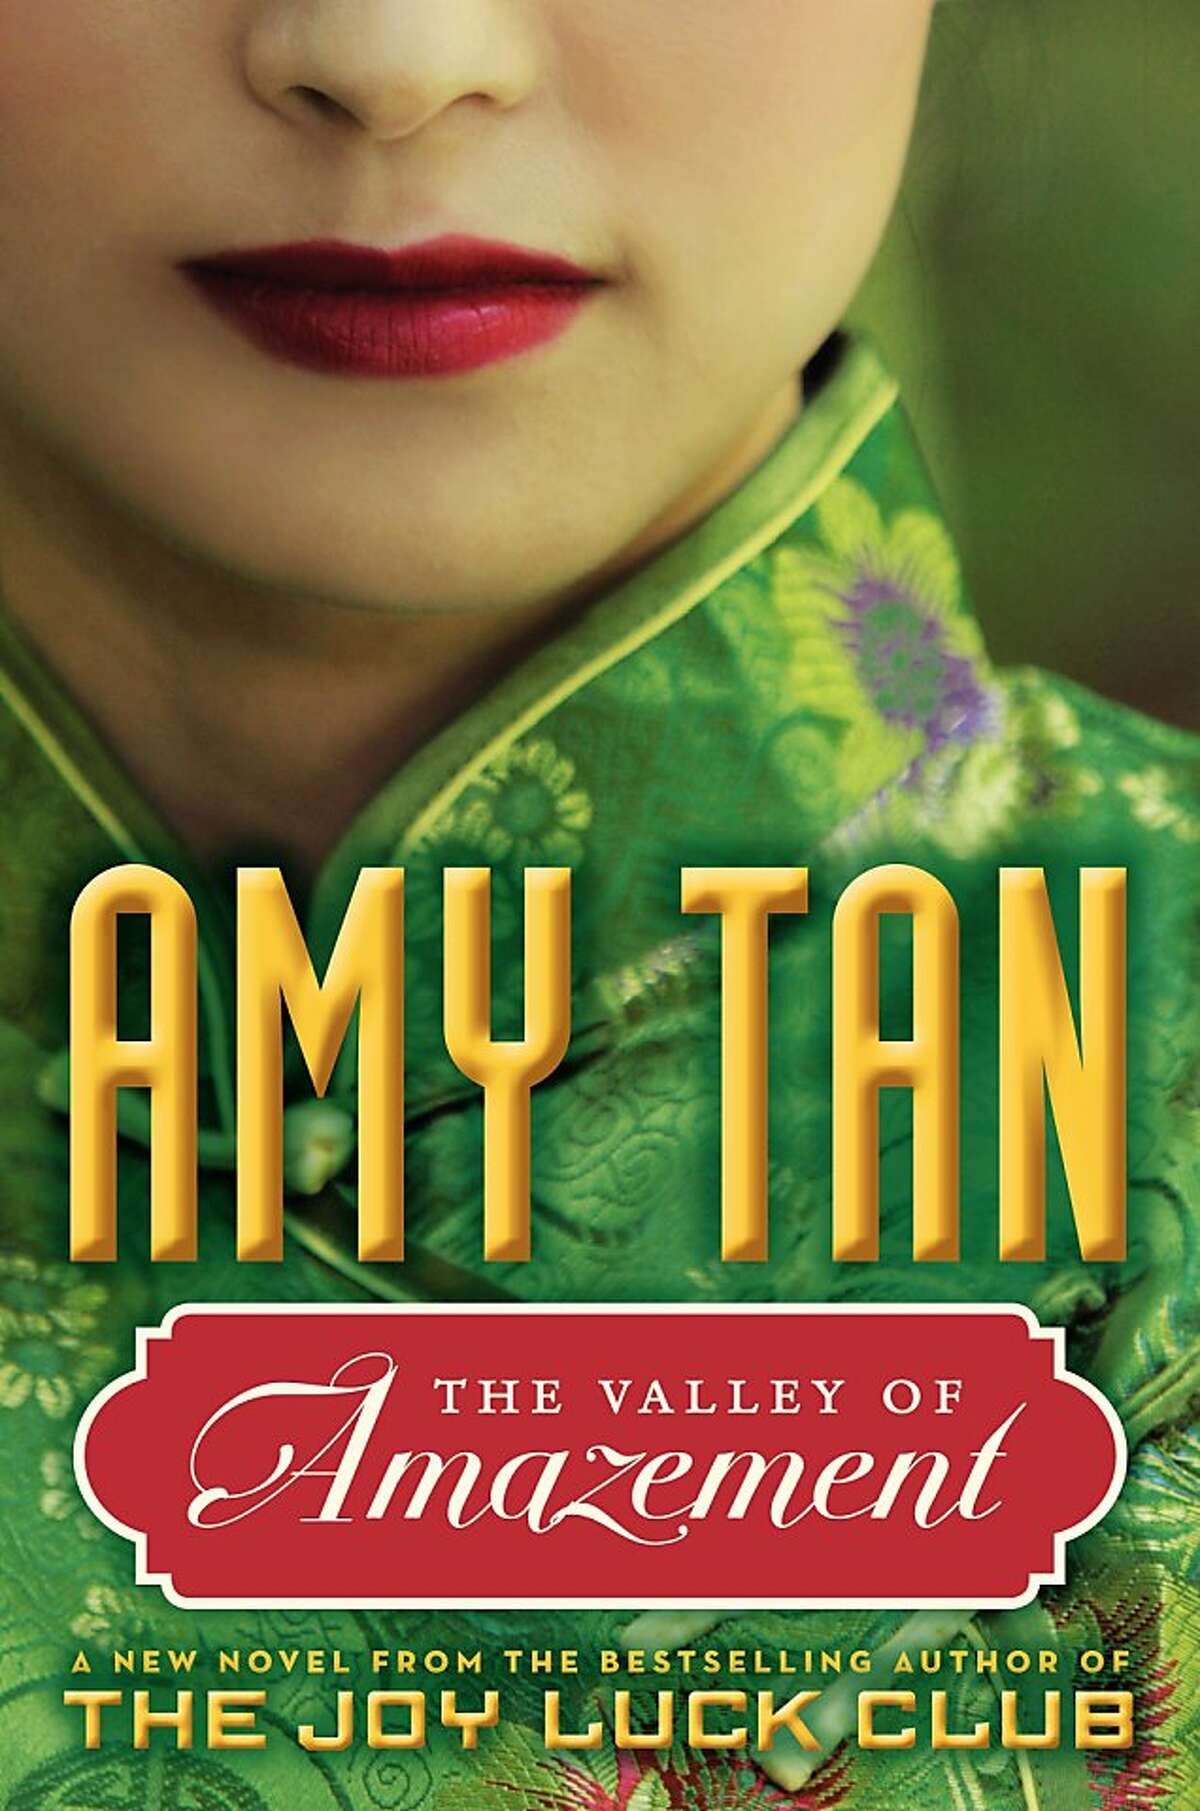 the valley of amazement by amy tan summary